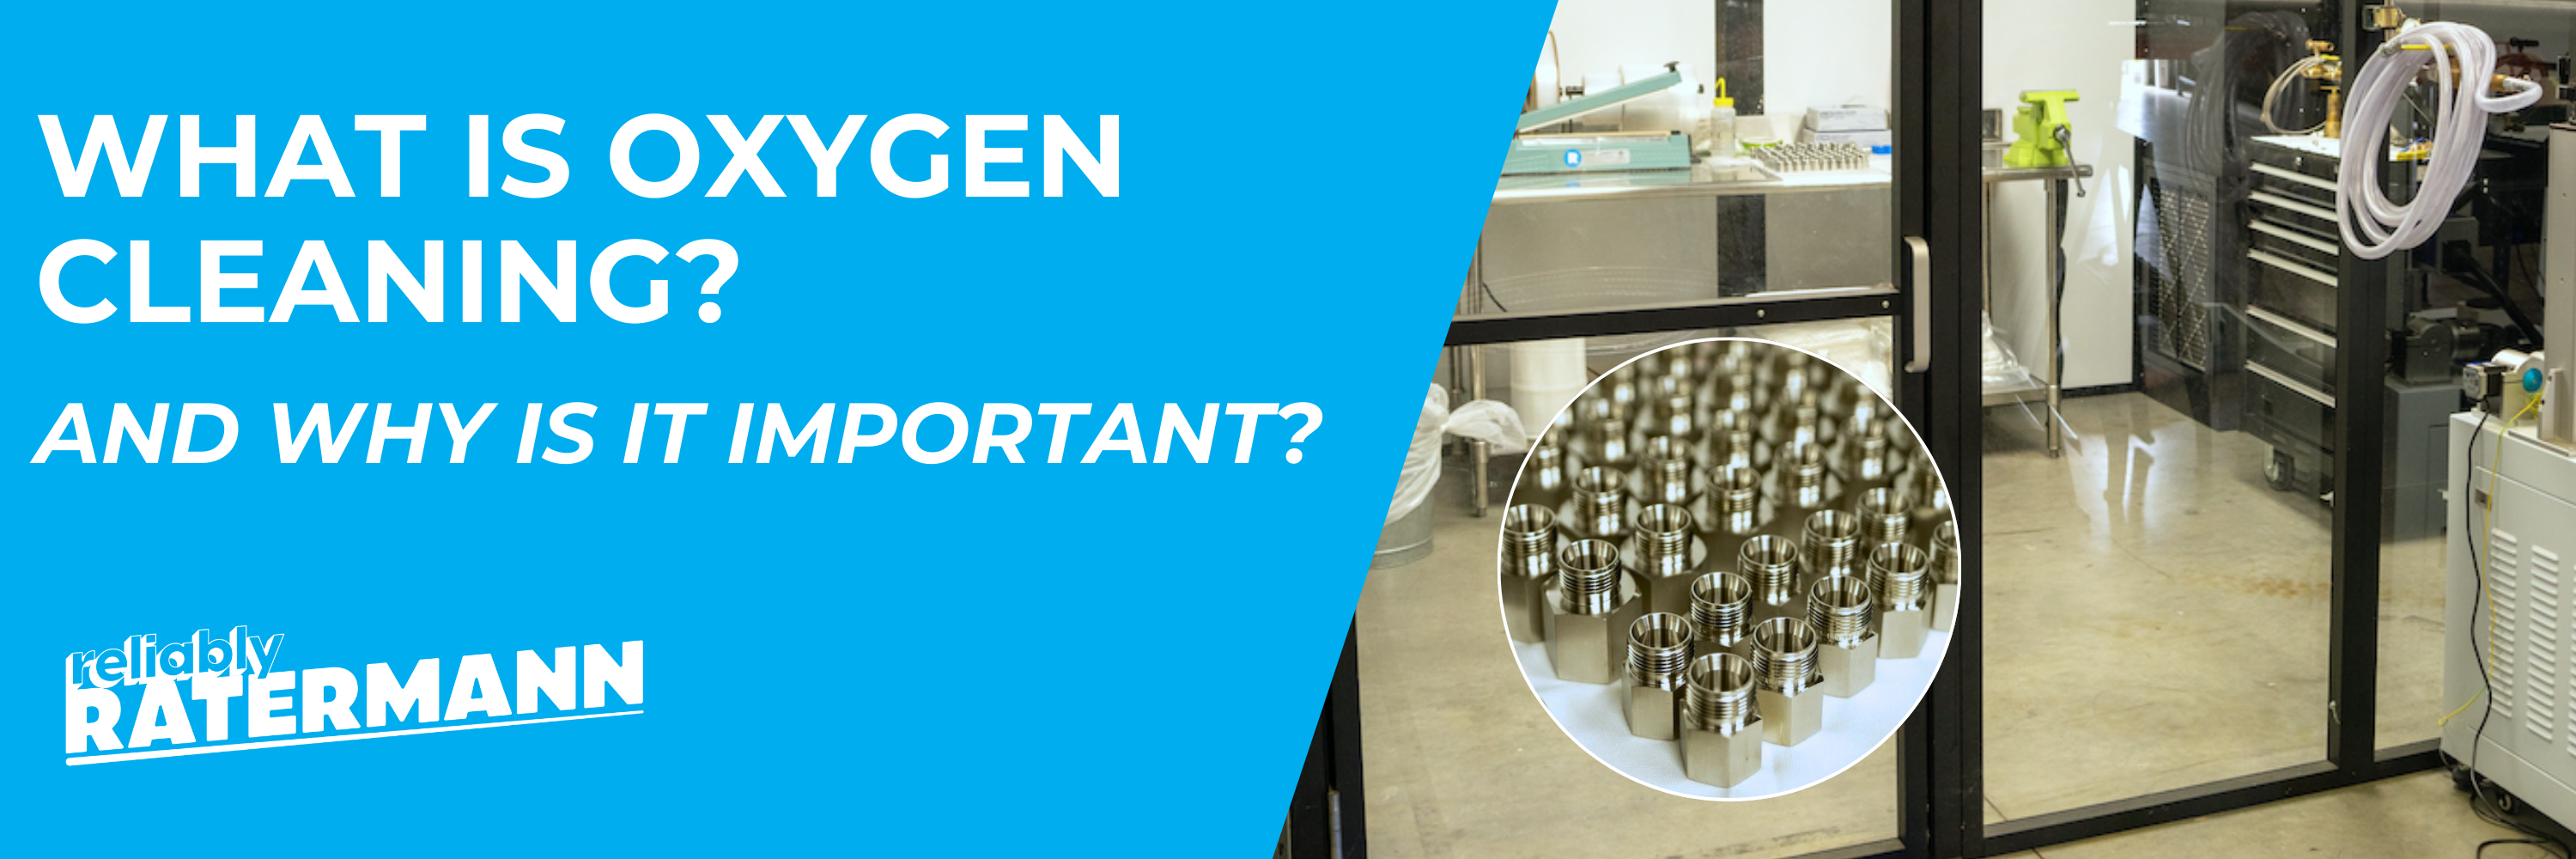 What is Oxygen Cleaning and Why is it Important?